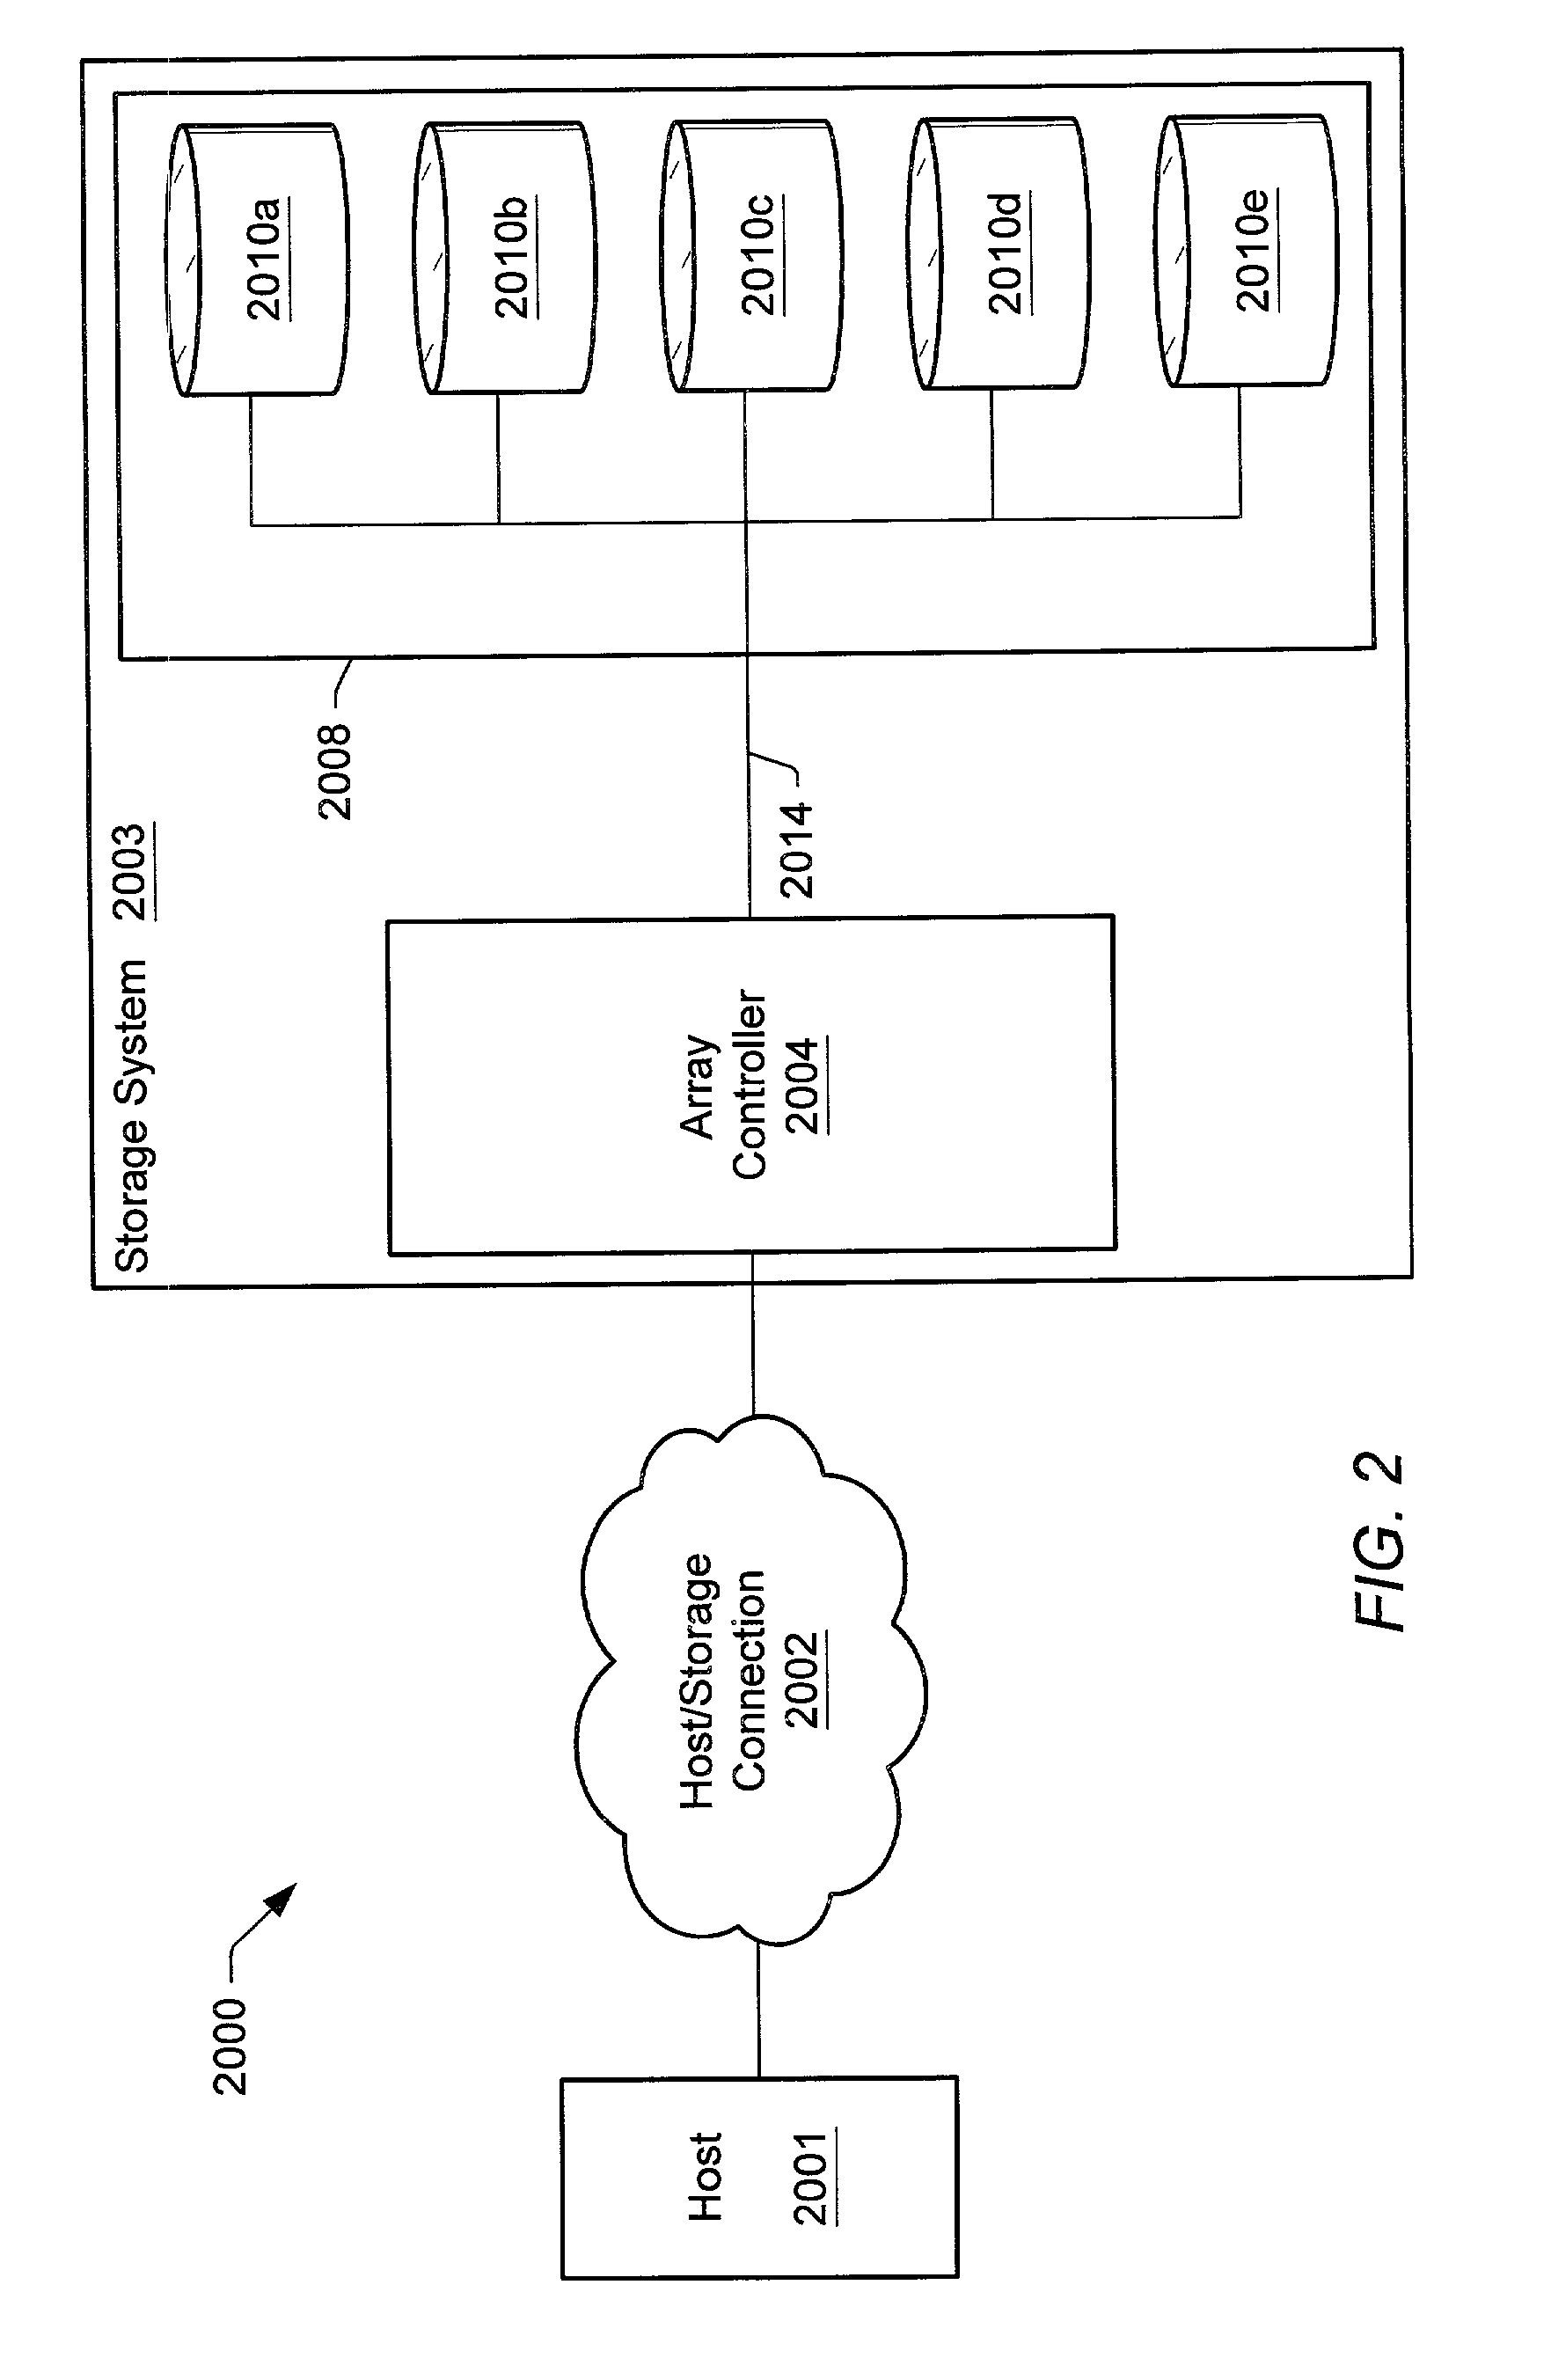 System and method for verifying error detection/correction logic